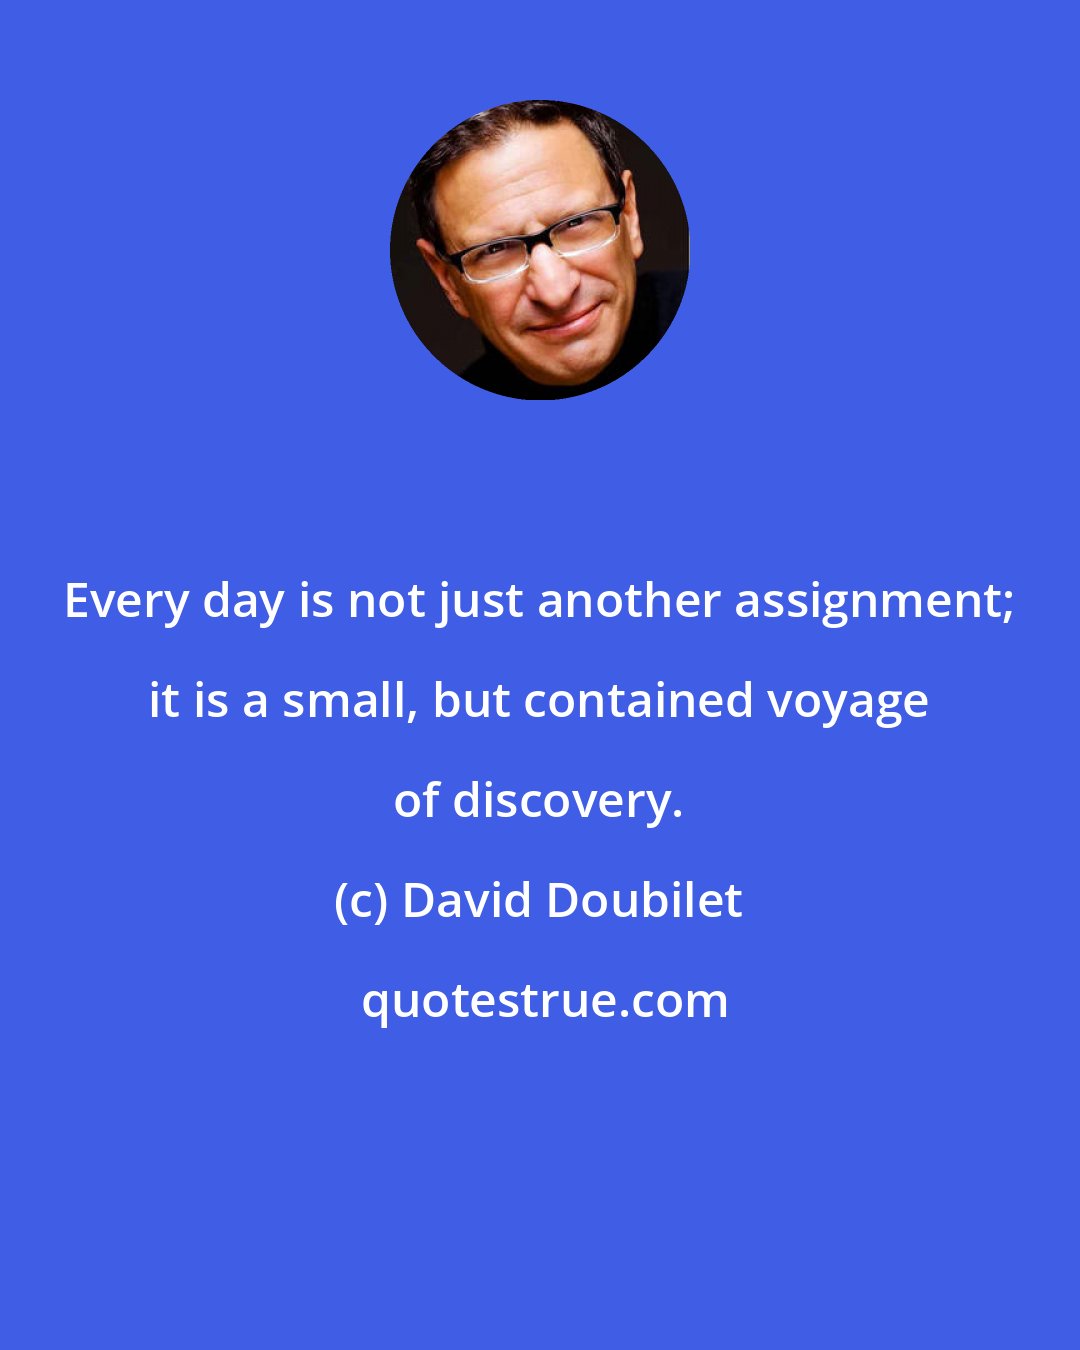 David Doubilet: Every day is not just another assignment; it is a small, but contained voyage of discovery.